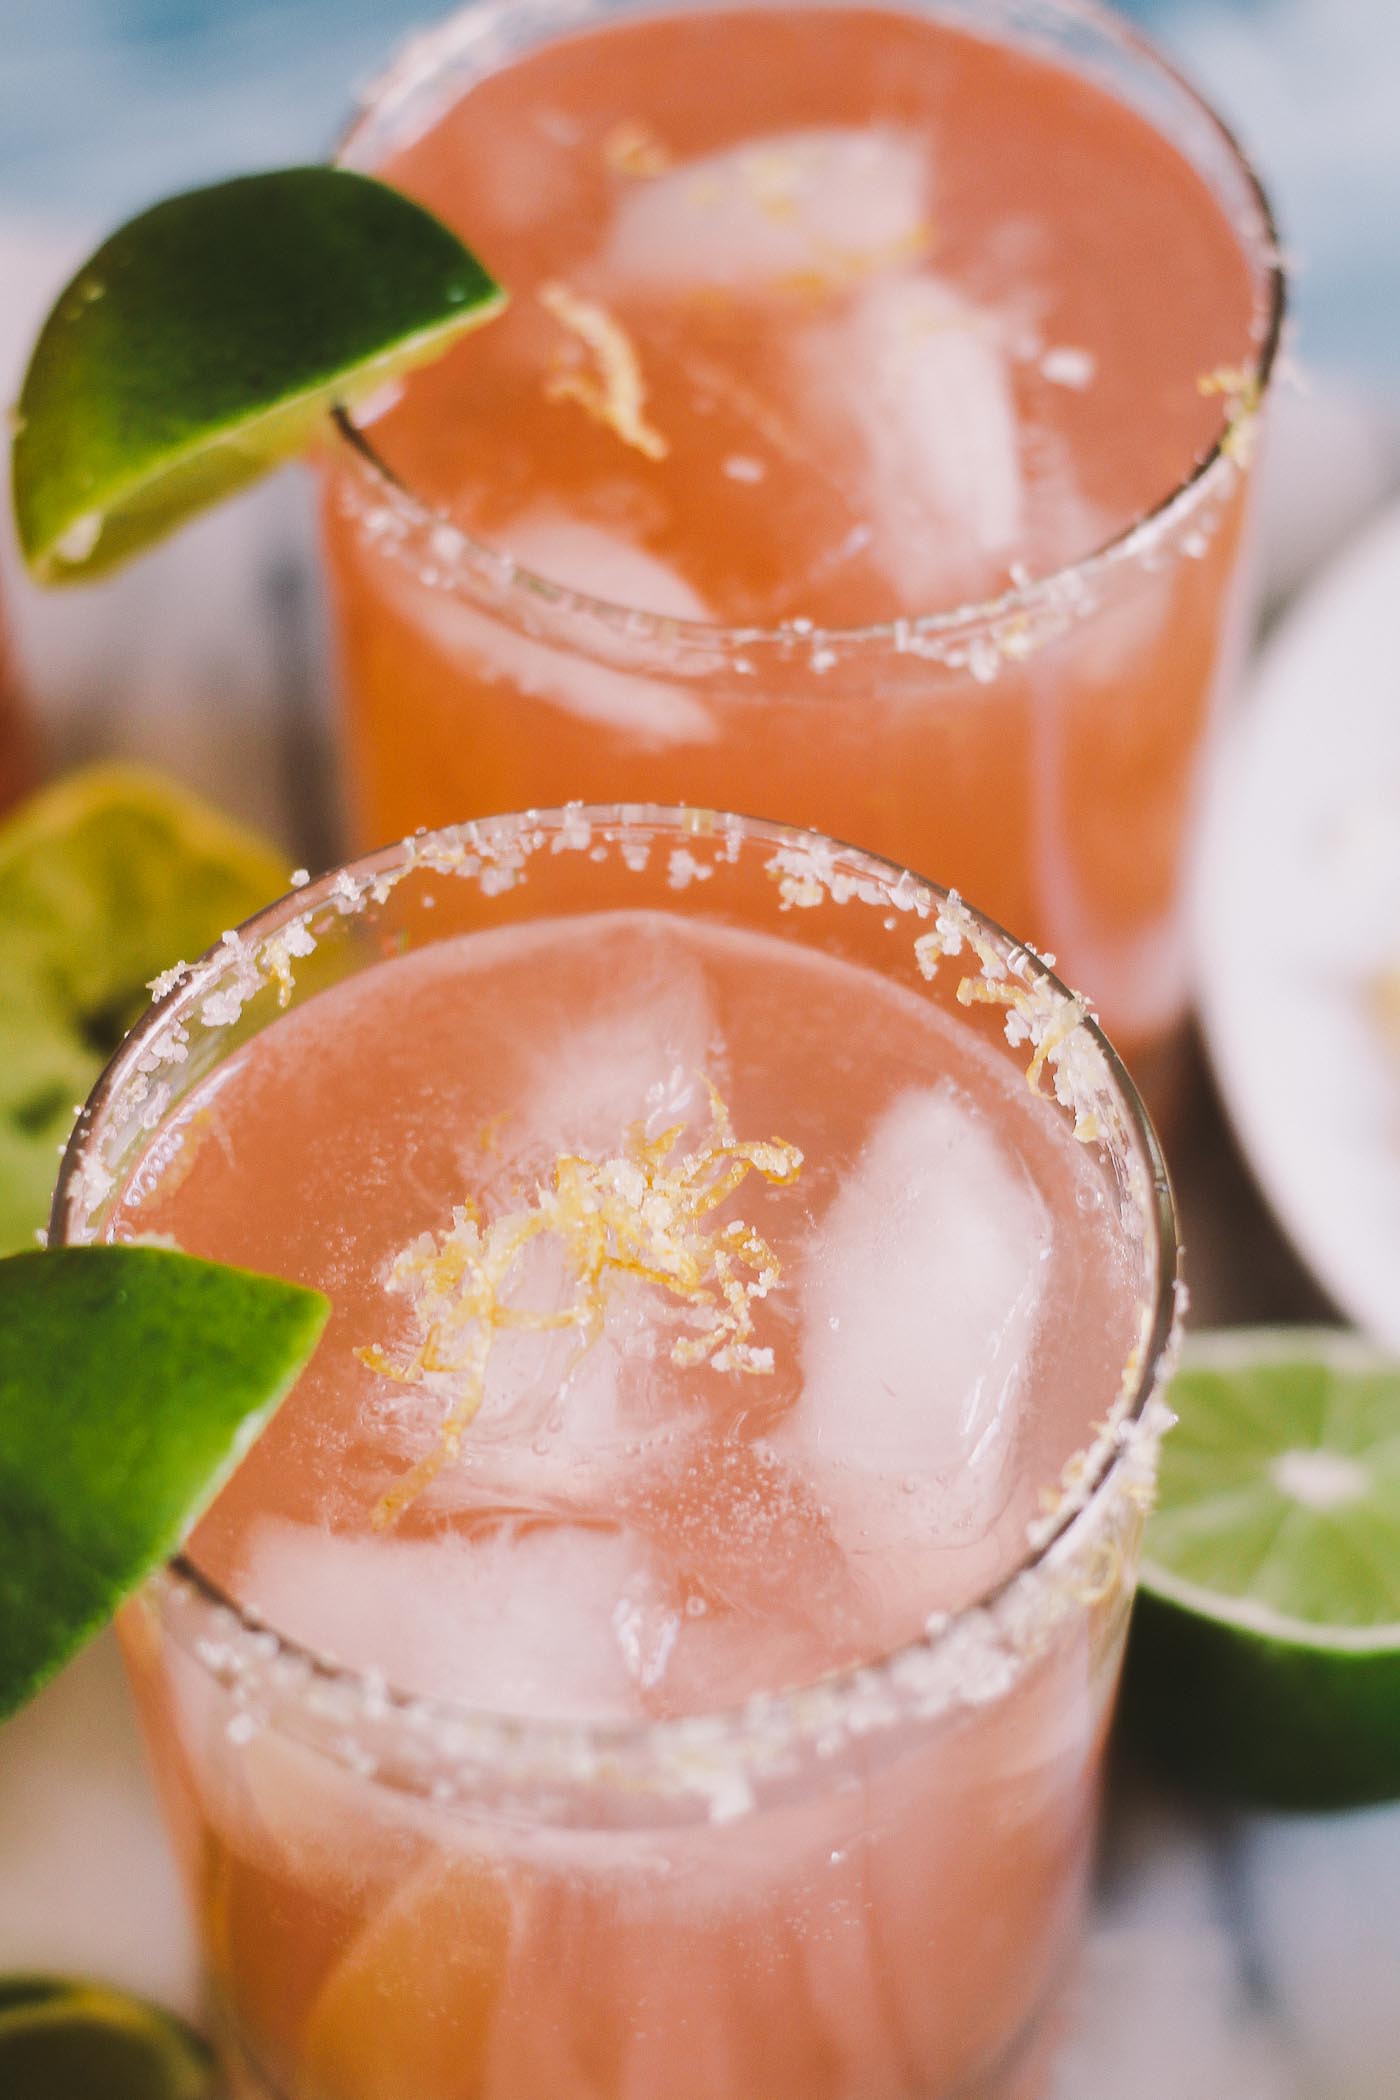 weeknight palomas with three simple ingredients, perfect for when you need a cocktail without frills or fuss. these weeknight palomas are perfect for whenever you'd like to have some girlfriends over on a whim for some laughs (+ chips & guac, of course). plus…cinco de mayo is right around the corner…#justsayin! | cinco de mayo recipe, cocktail recipe, girls night idea, girls night cocktail, paloma recipe, easy cocktail, tequila |